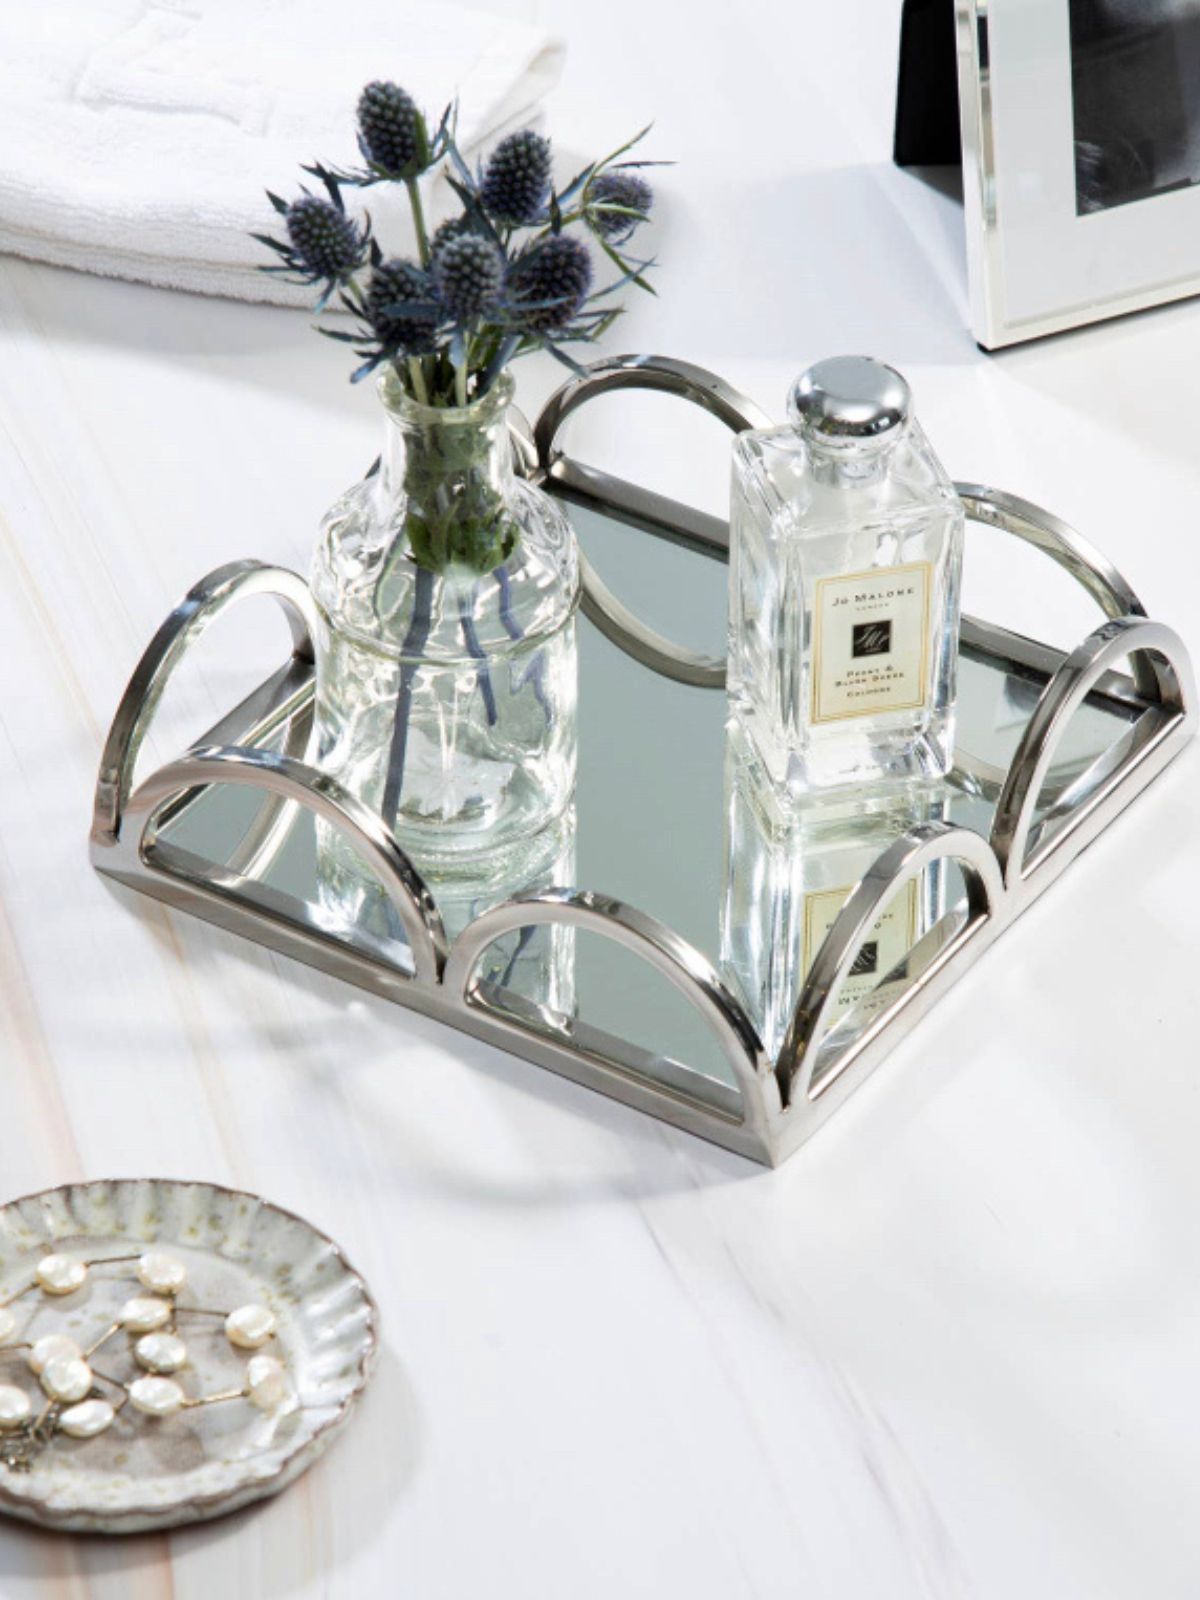 8 inch Squared Mirror Napkin Holder with Chrome Loop Bars.